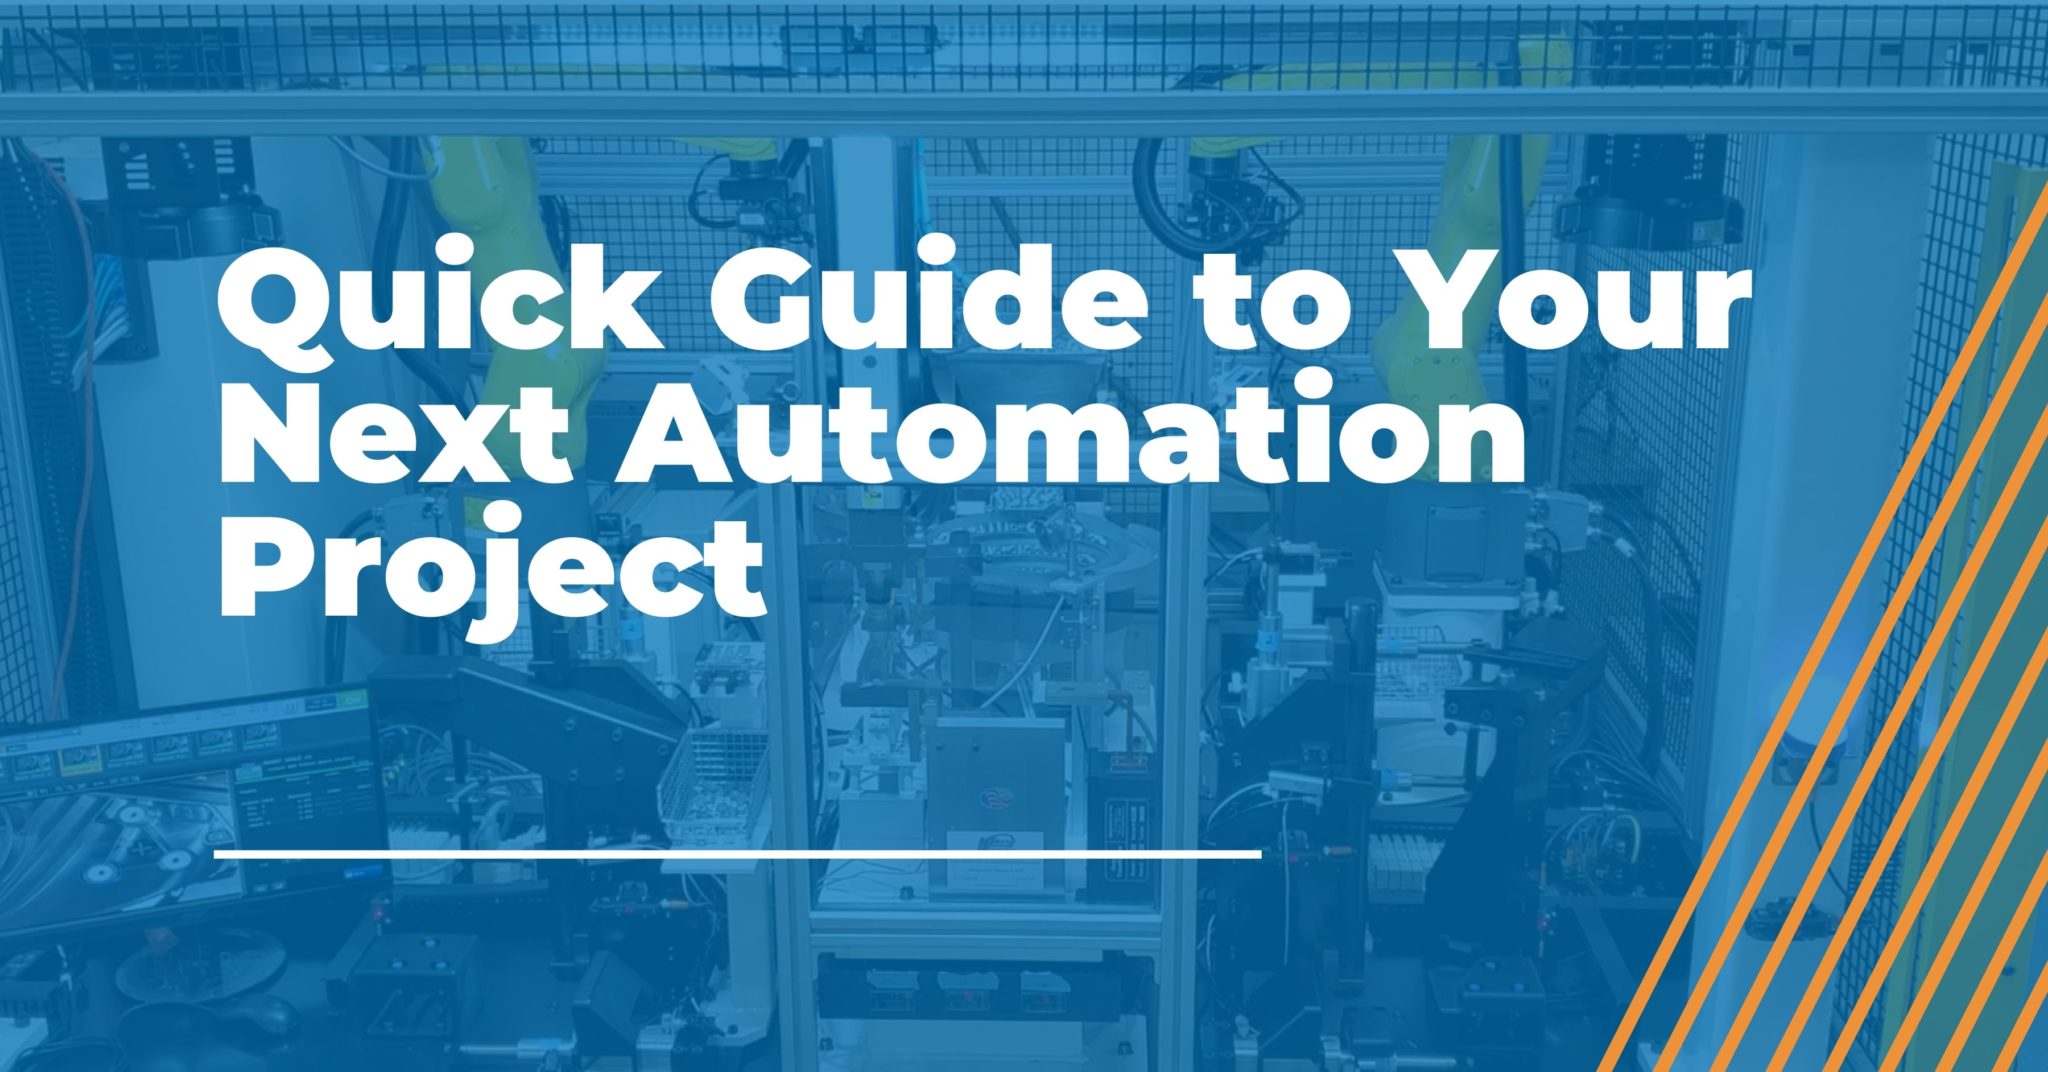 Quick Guide to Your Next Automation Project